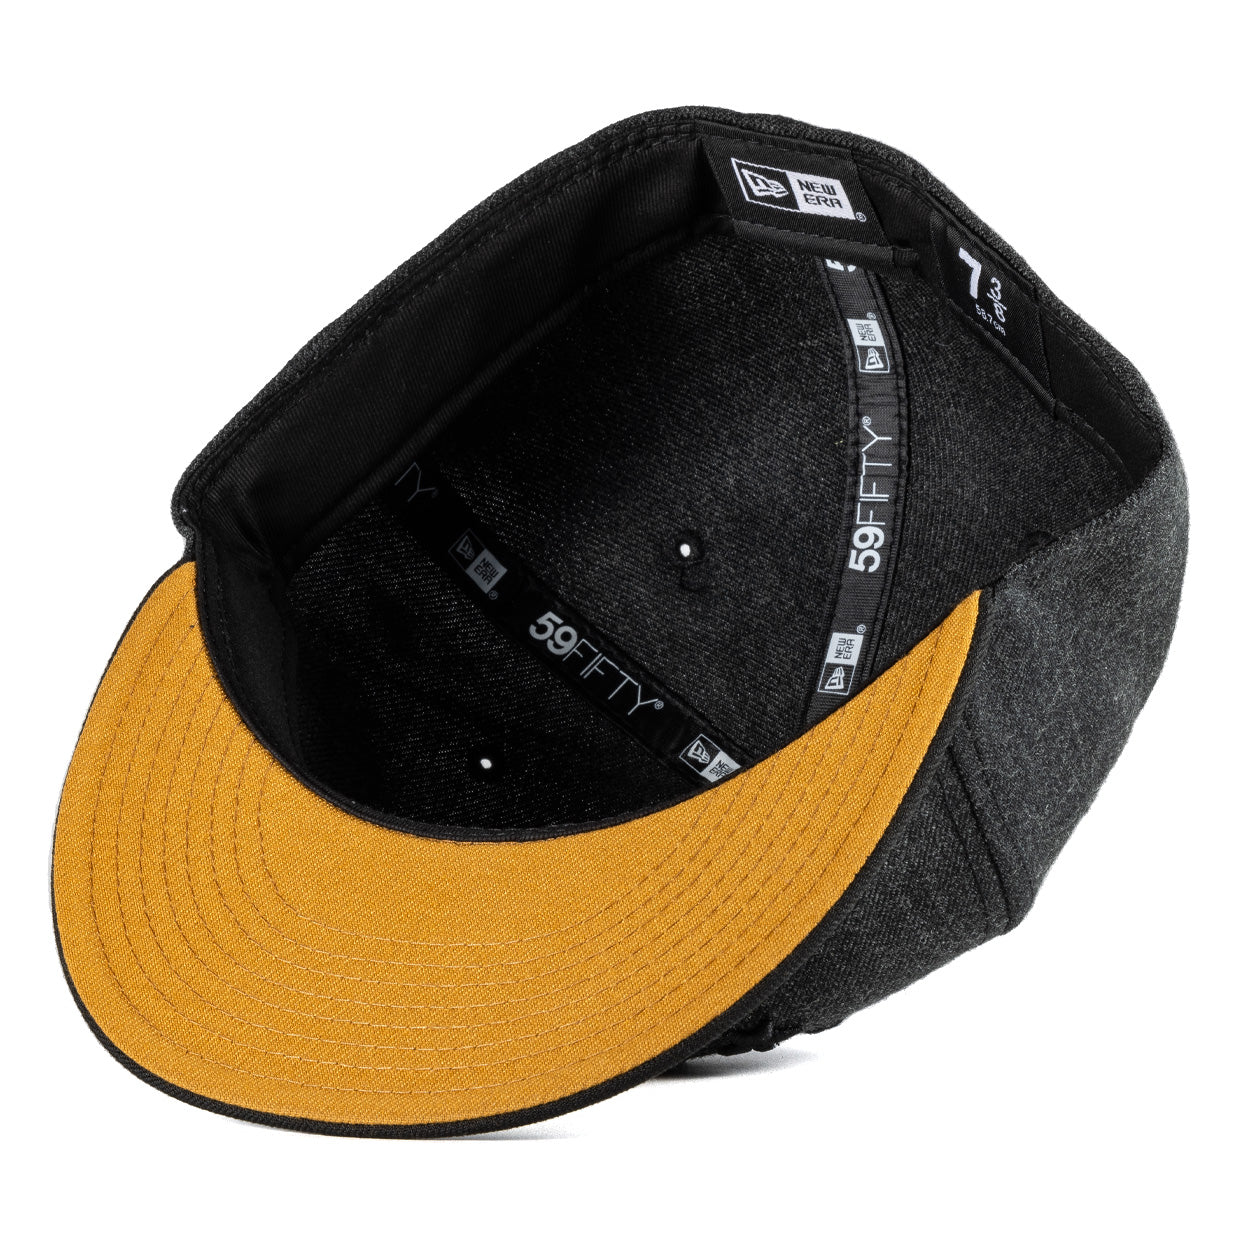 Union Midnight Oil New Era Fitted